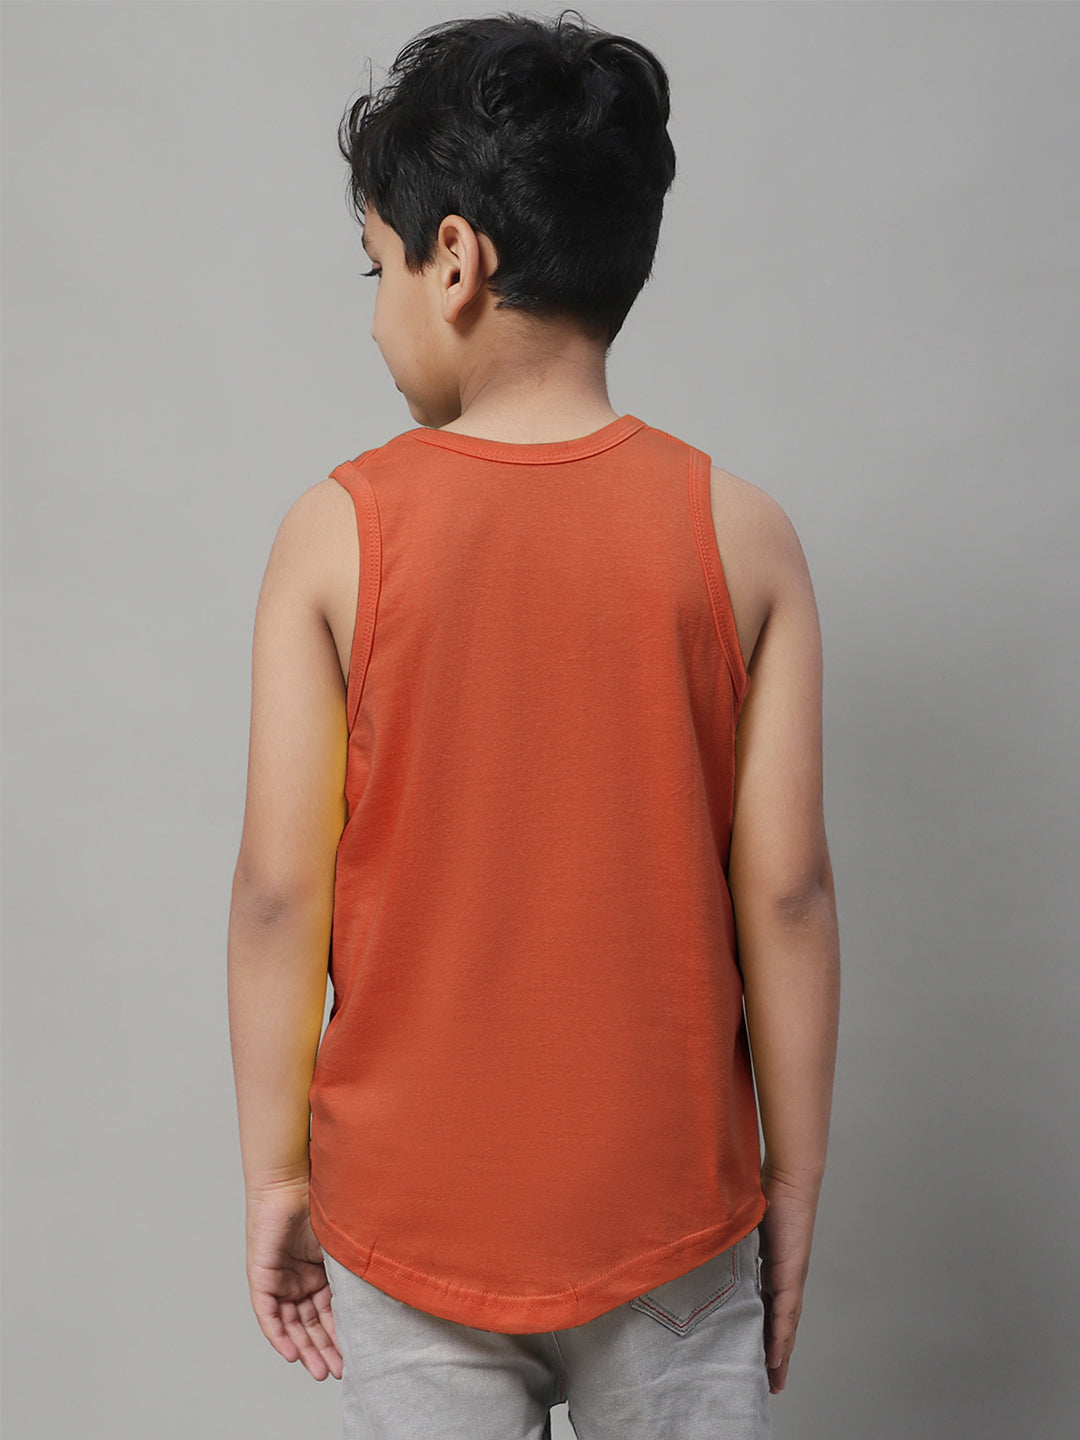 Kids Freedom Pure Cotton Printed Innerwear Vest - Friskers